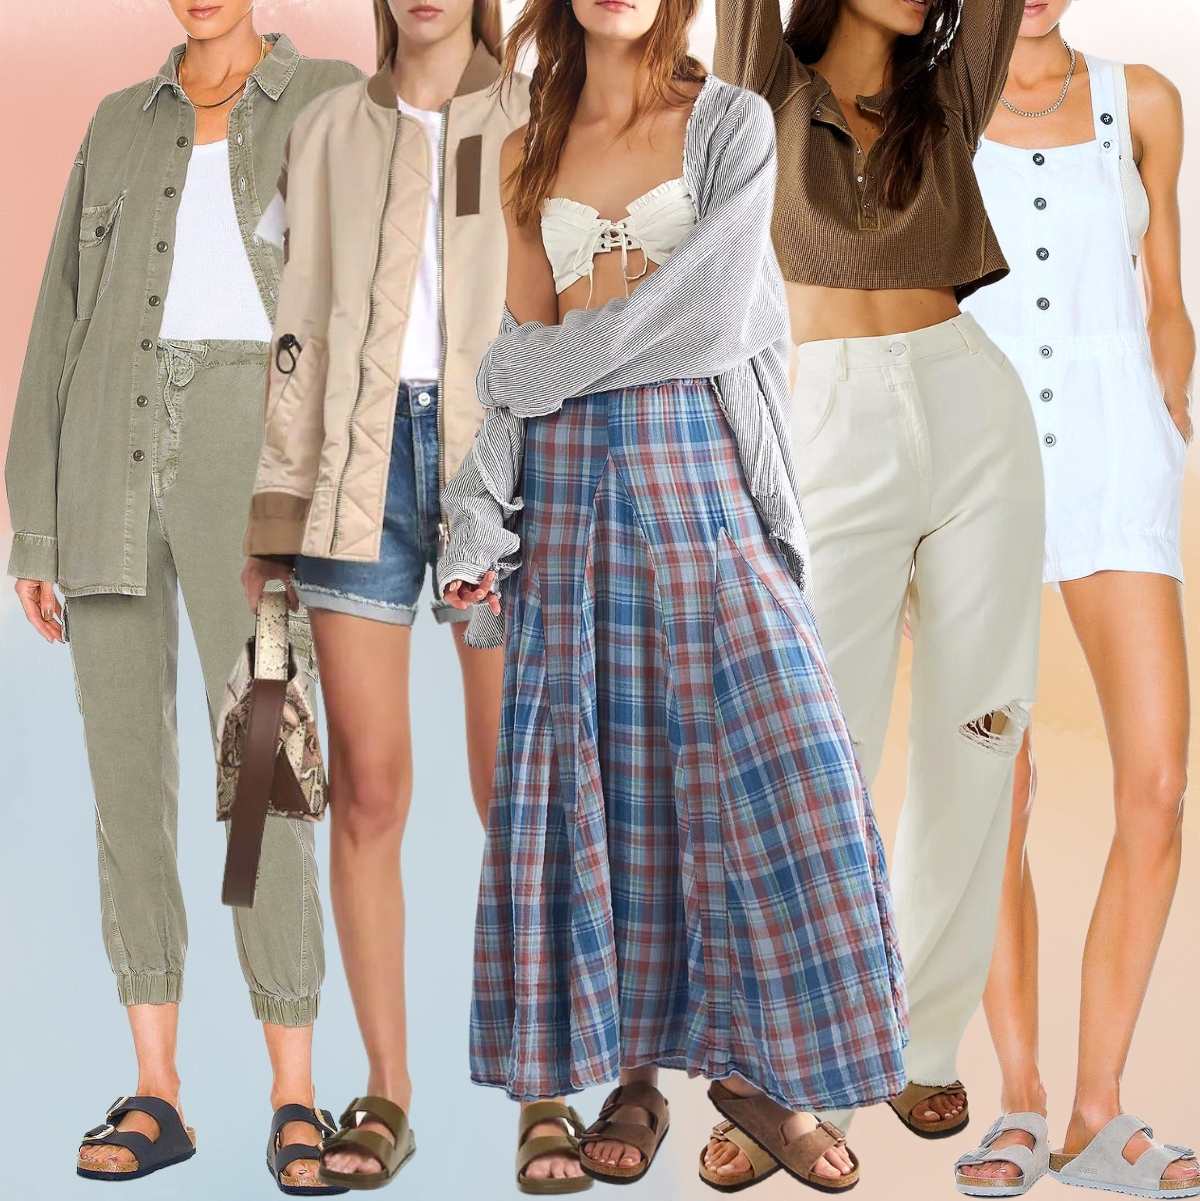 Collage of 5 women wearing birkenstocks slides outfits with casual outfits.